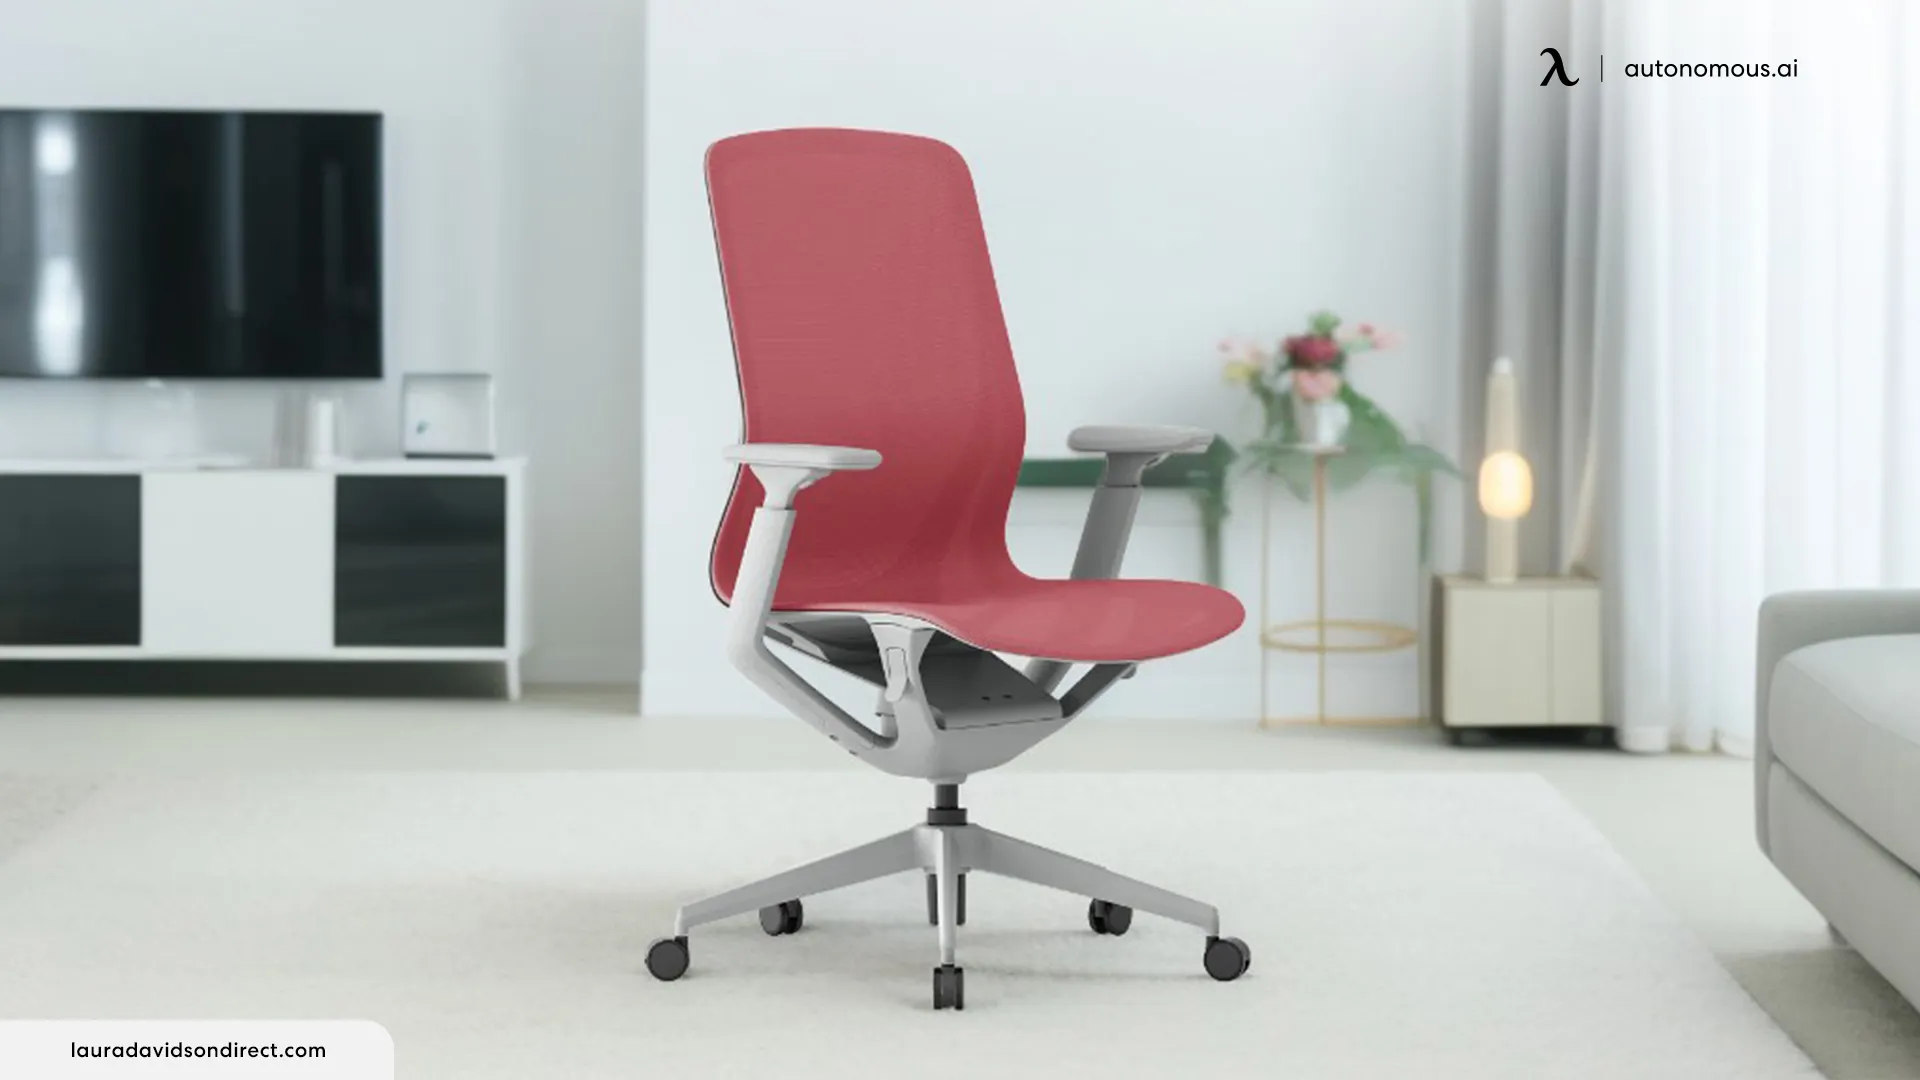 Waverly Mesh Chair – Most Affordable